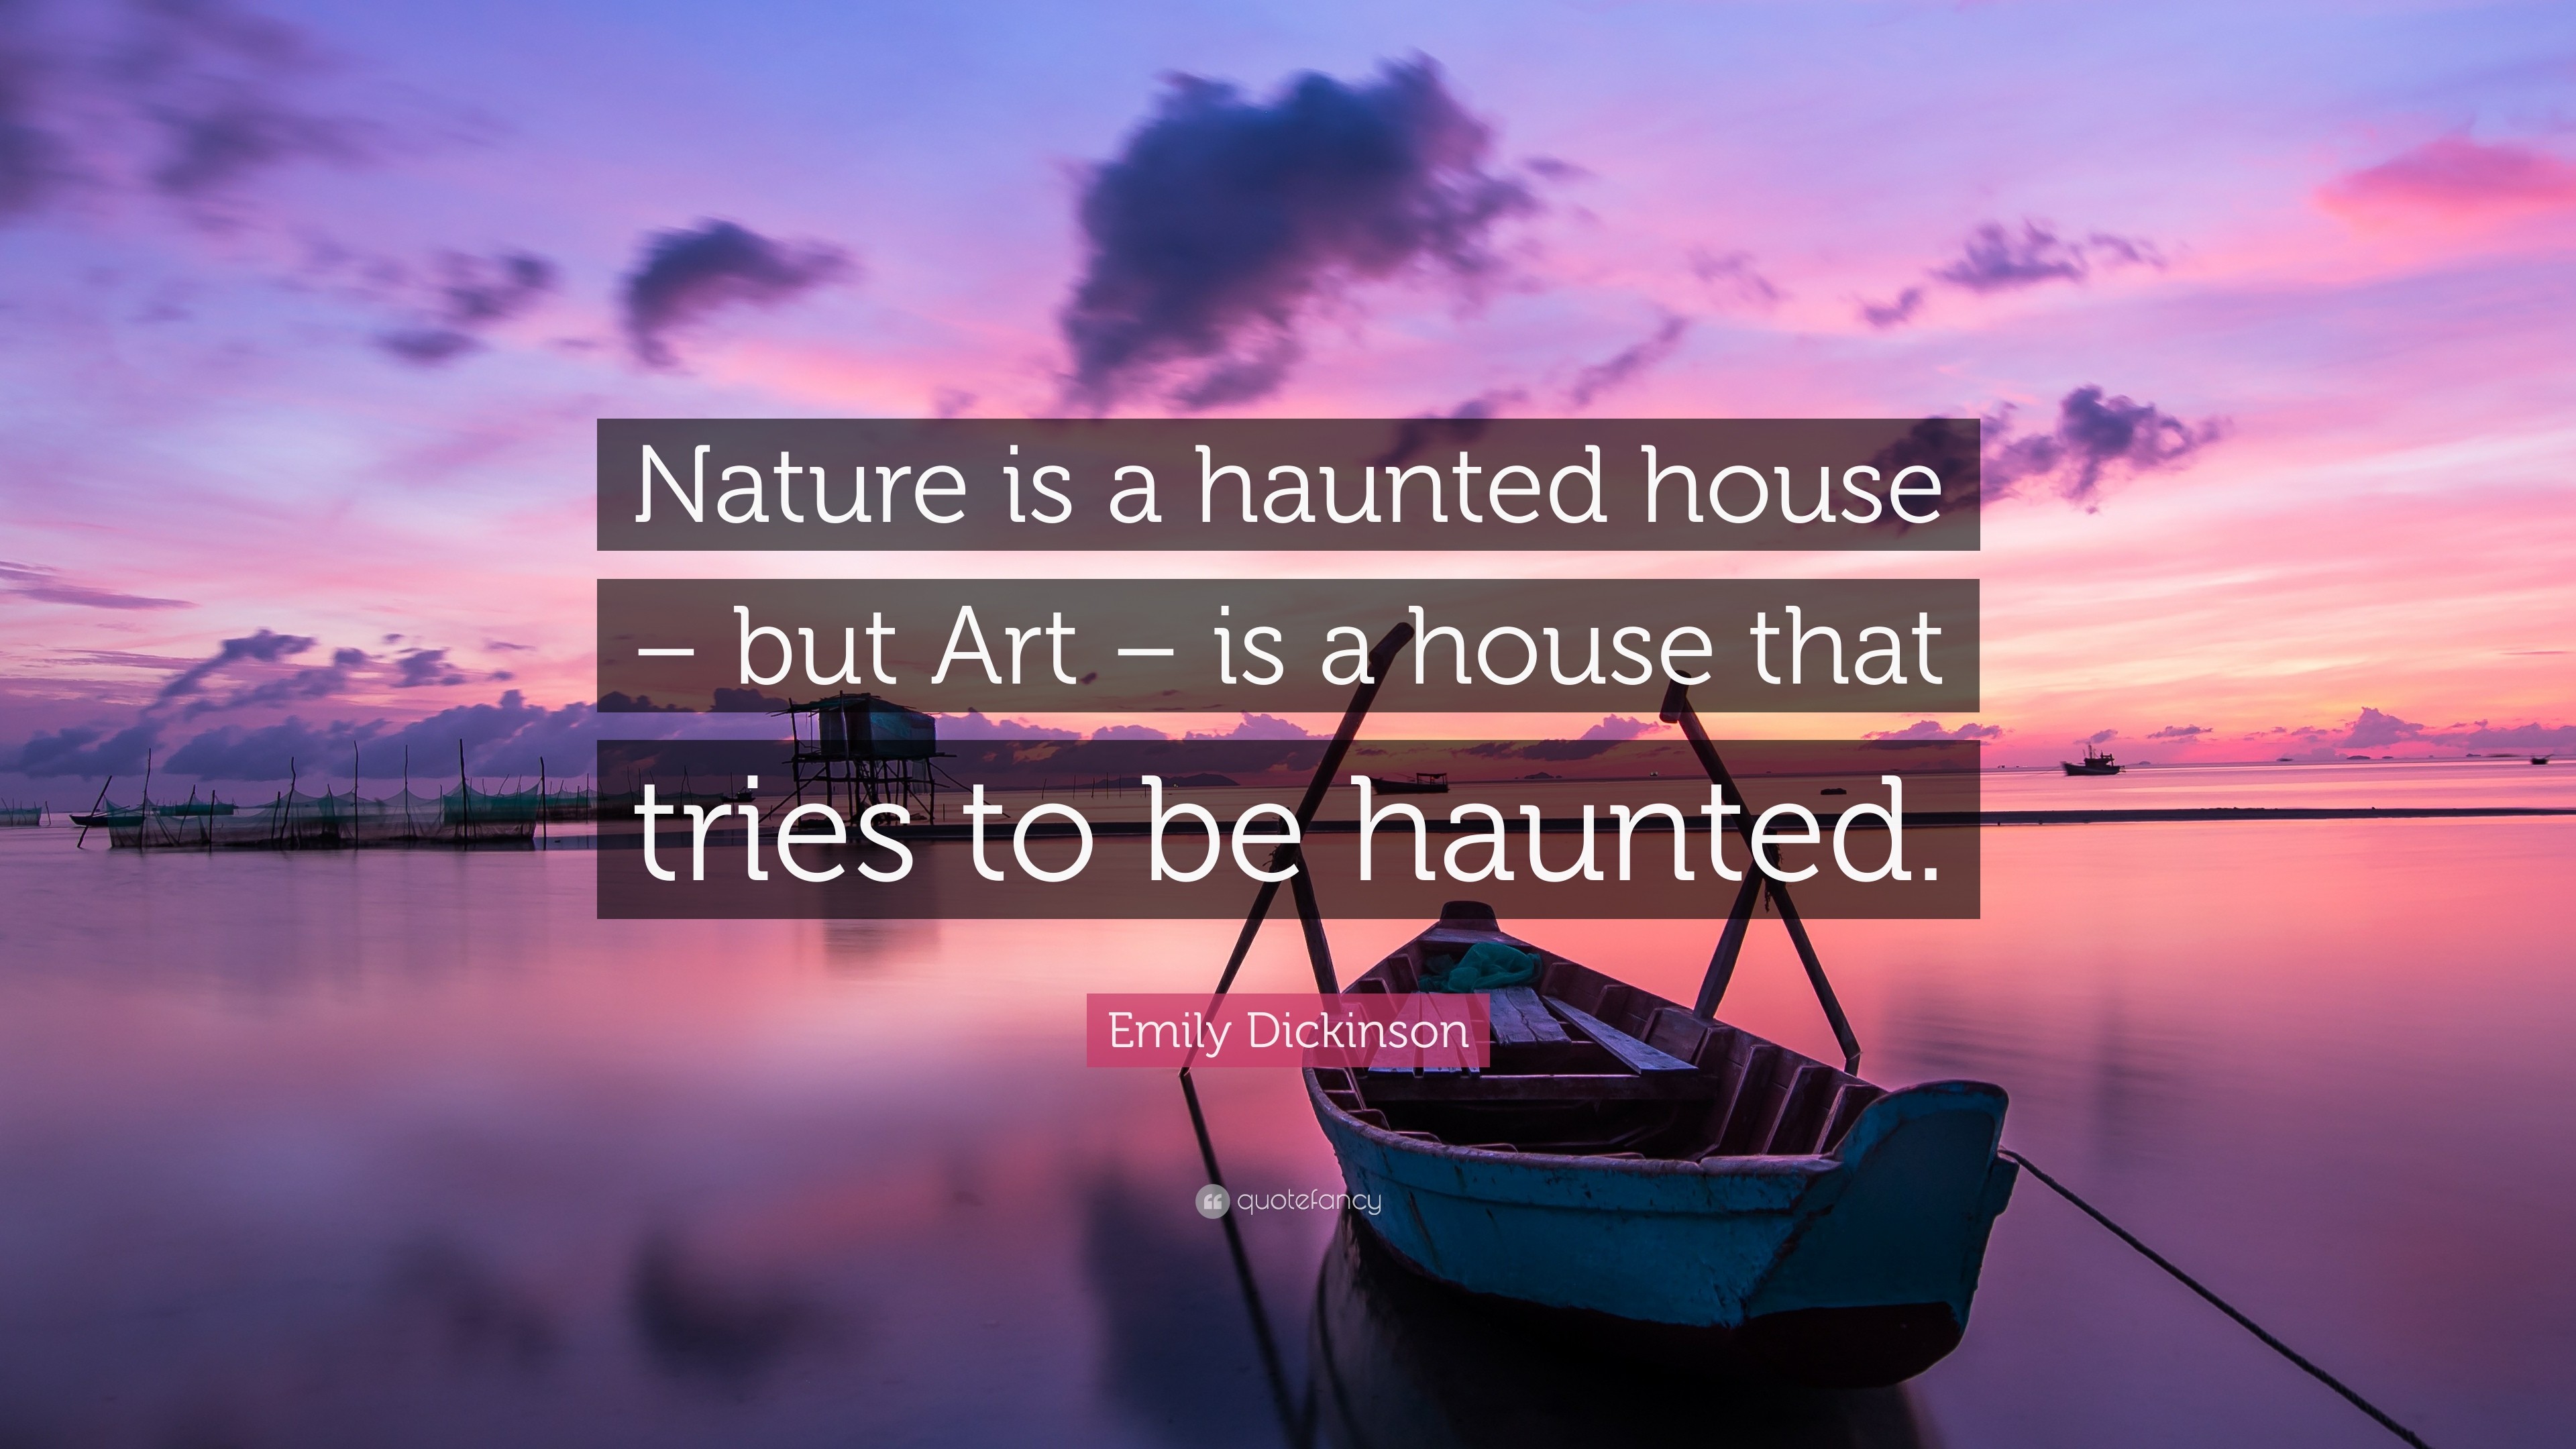 3840x2160 Emily Dickinson Quote: “Nature is a haunted house – but Art – is a